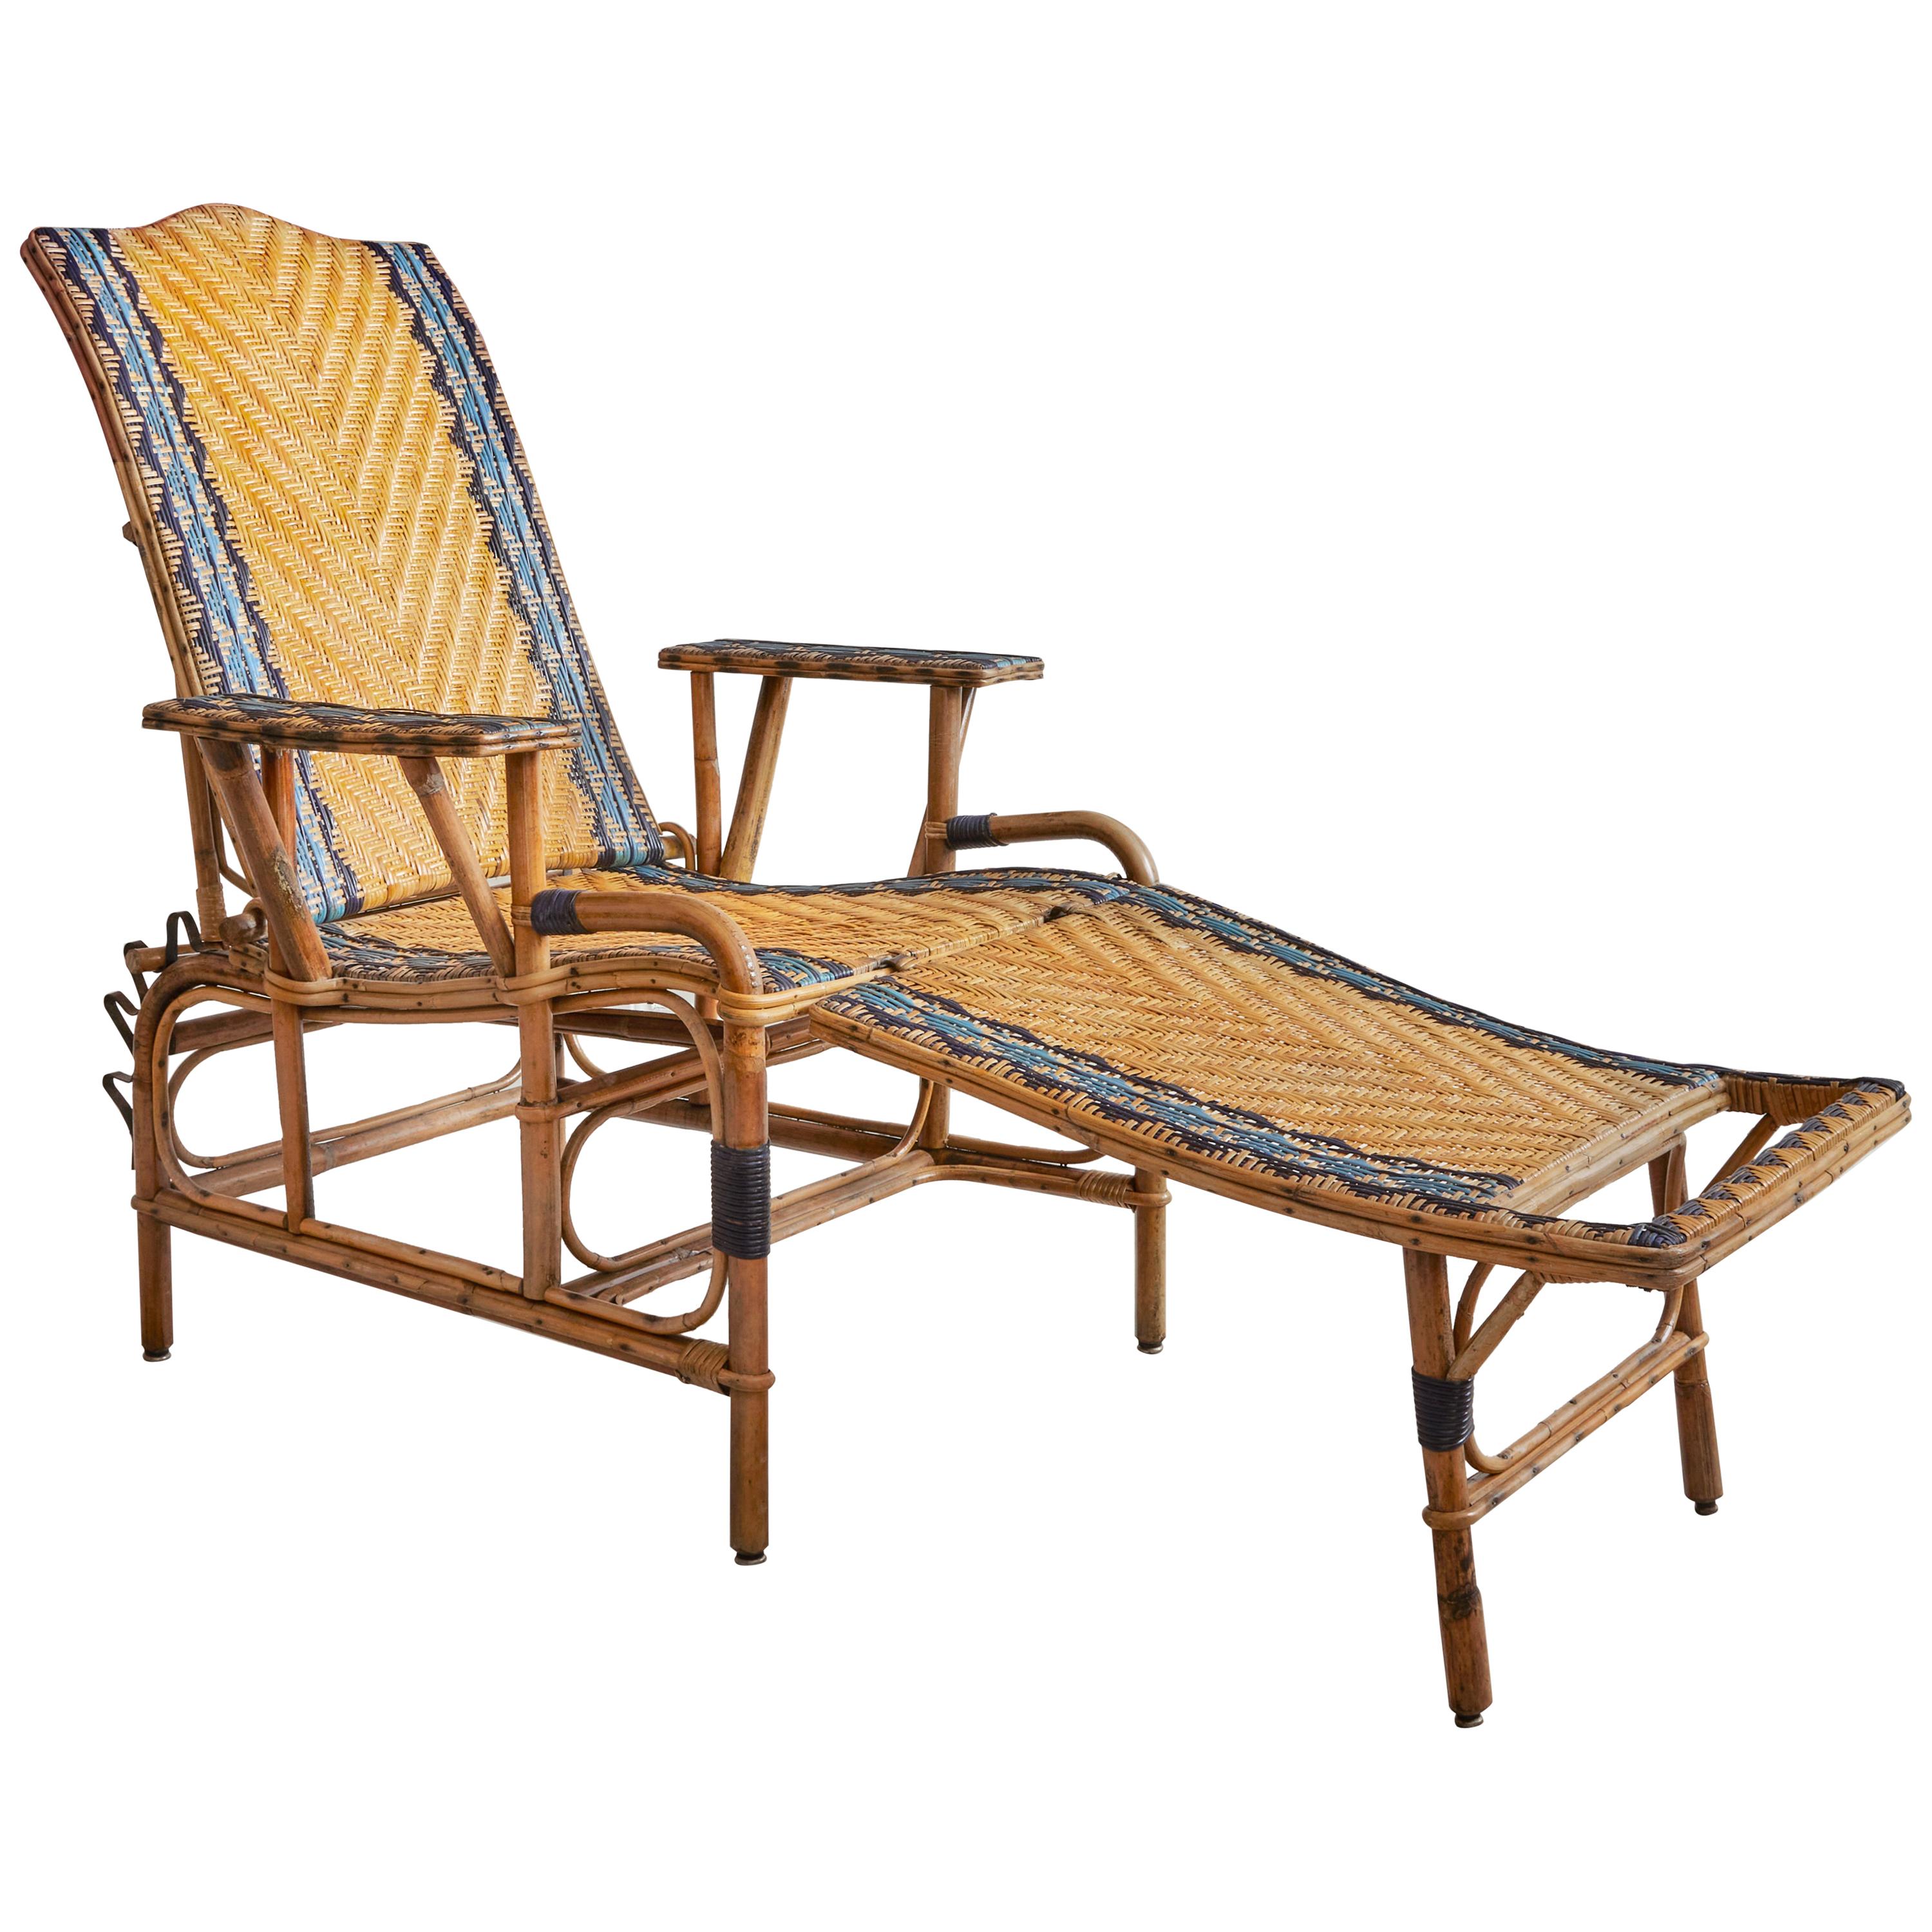 Vintage Rattan Chaise Longue with Blue and Black Woven Details, France, 1930's